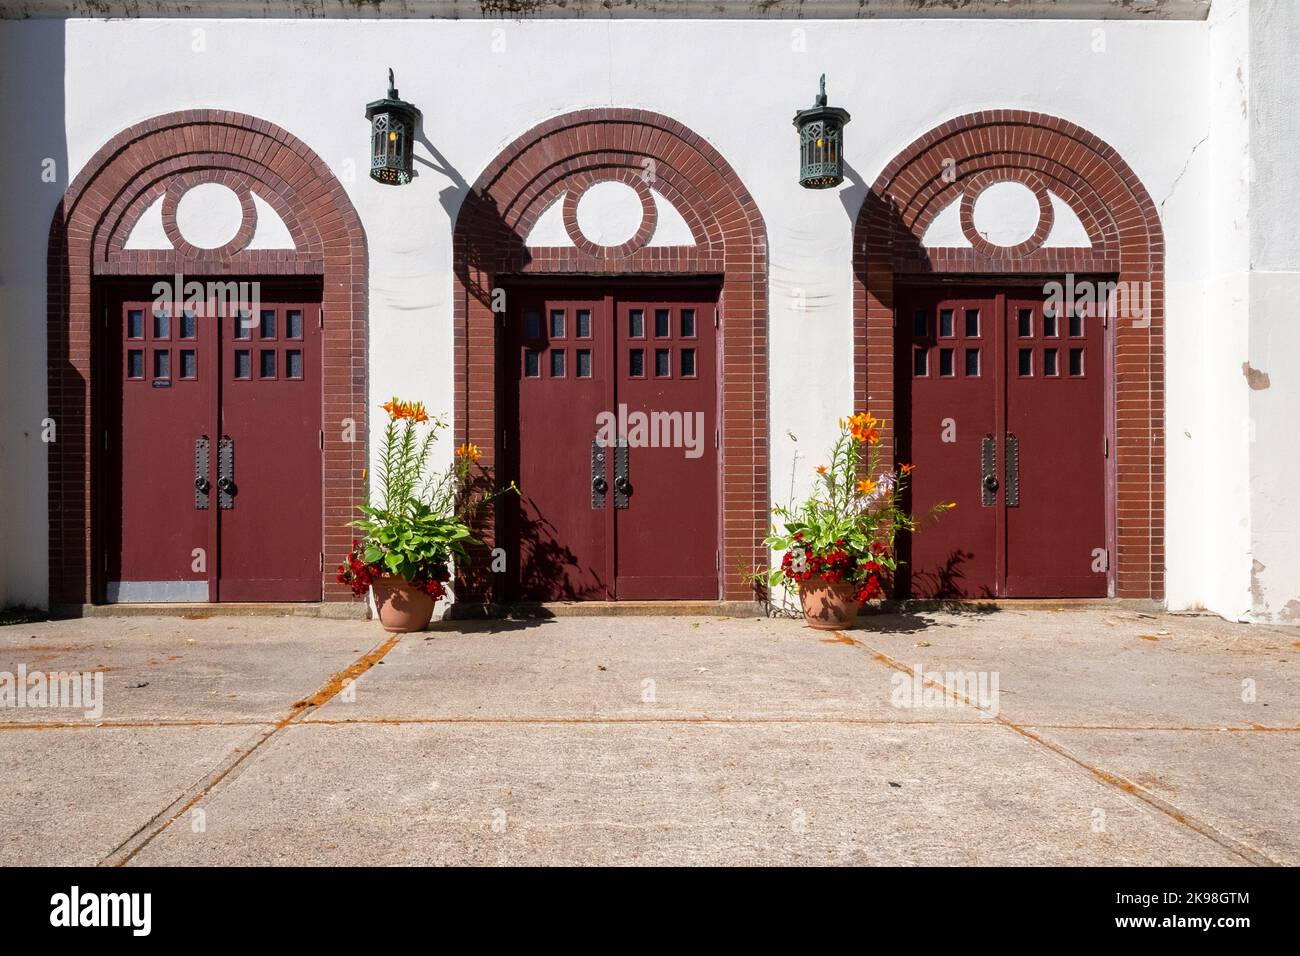 Three sets of red double doors with six small windows and a large door handle. The building is white stucco with vintage lanterns. Stock Photo